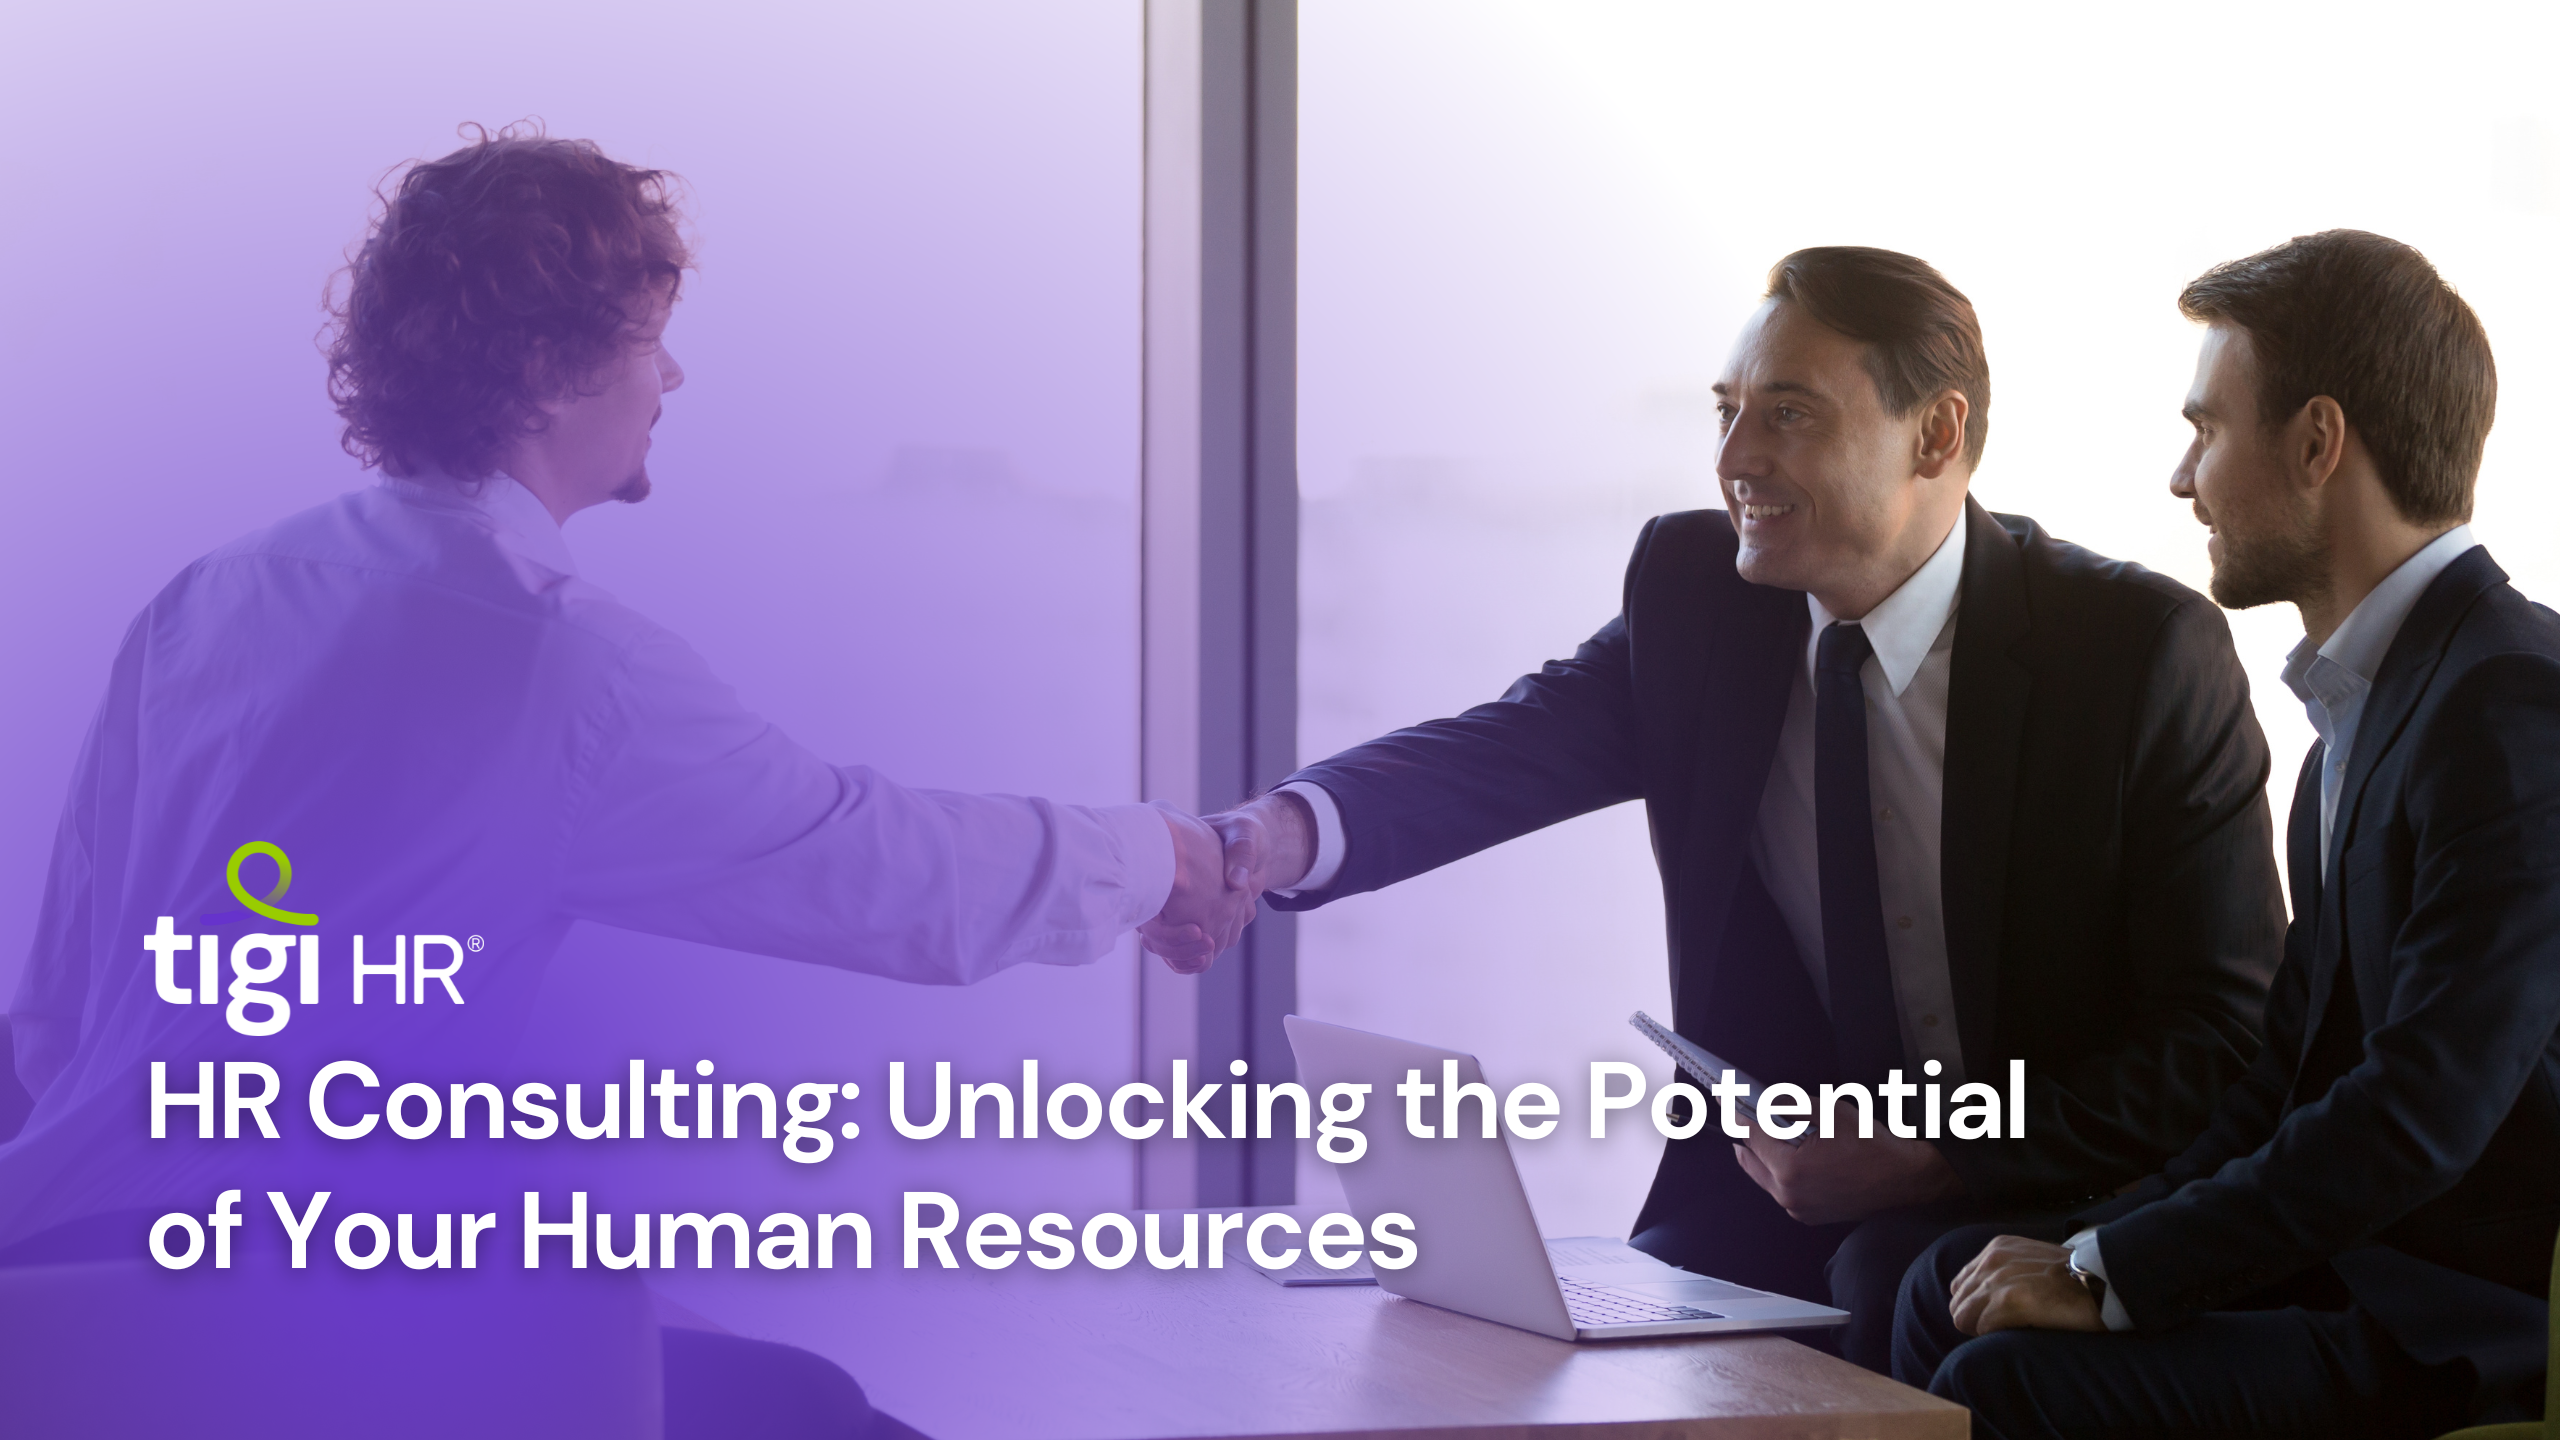 HR Consulting: Unlocking the Potential of Your Human Resources. Find jobs at TIGI HR.